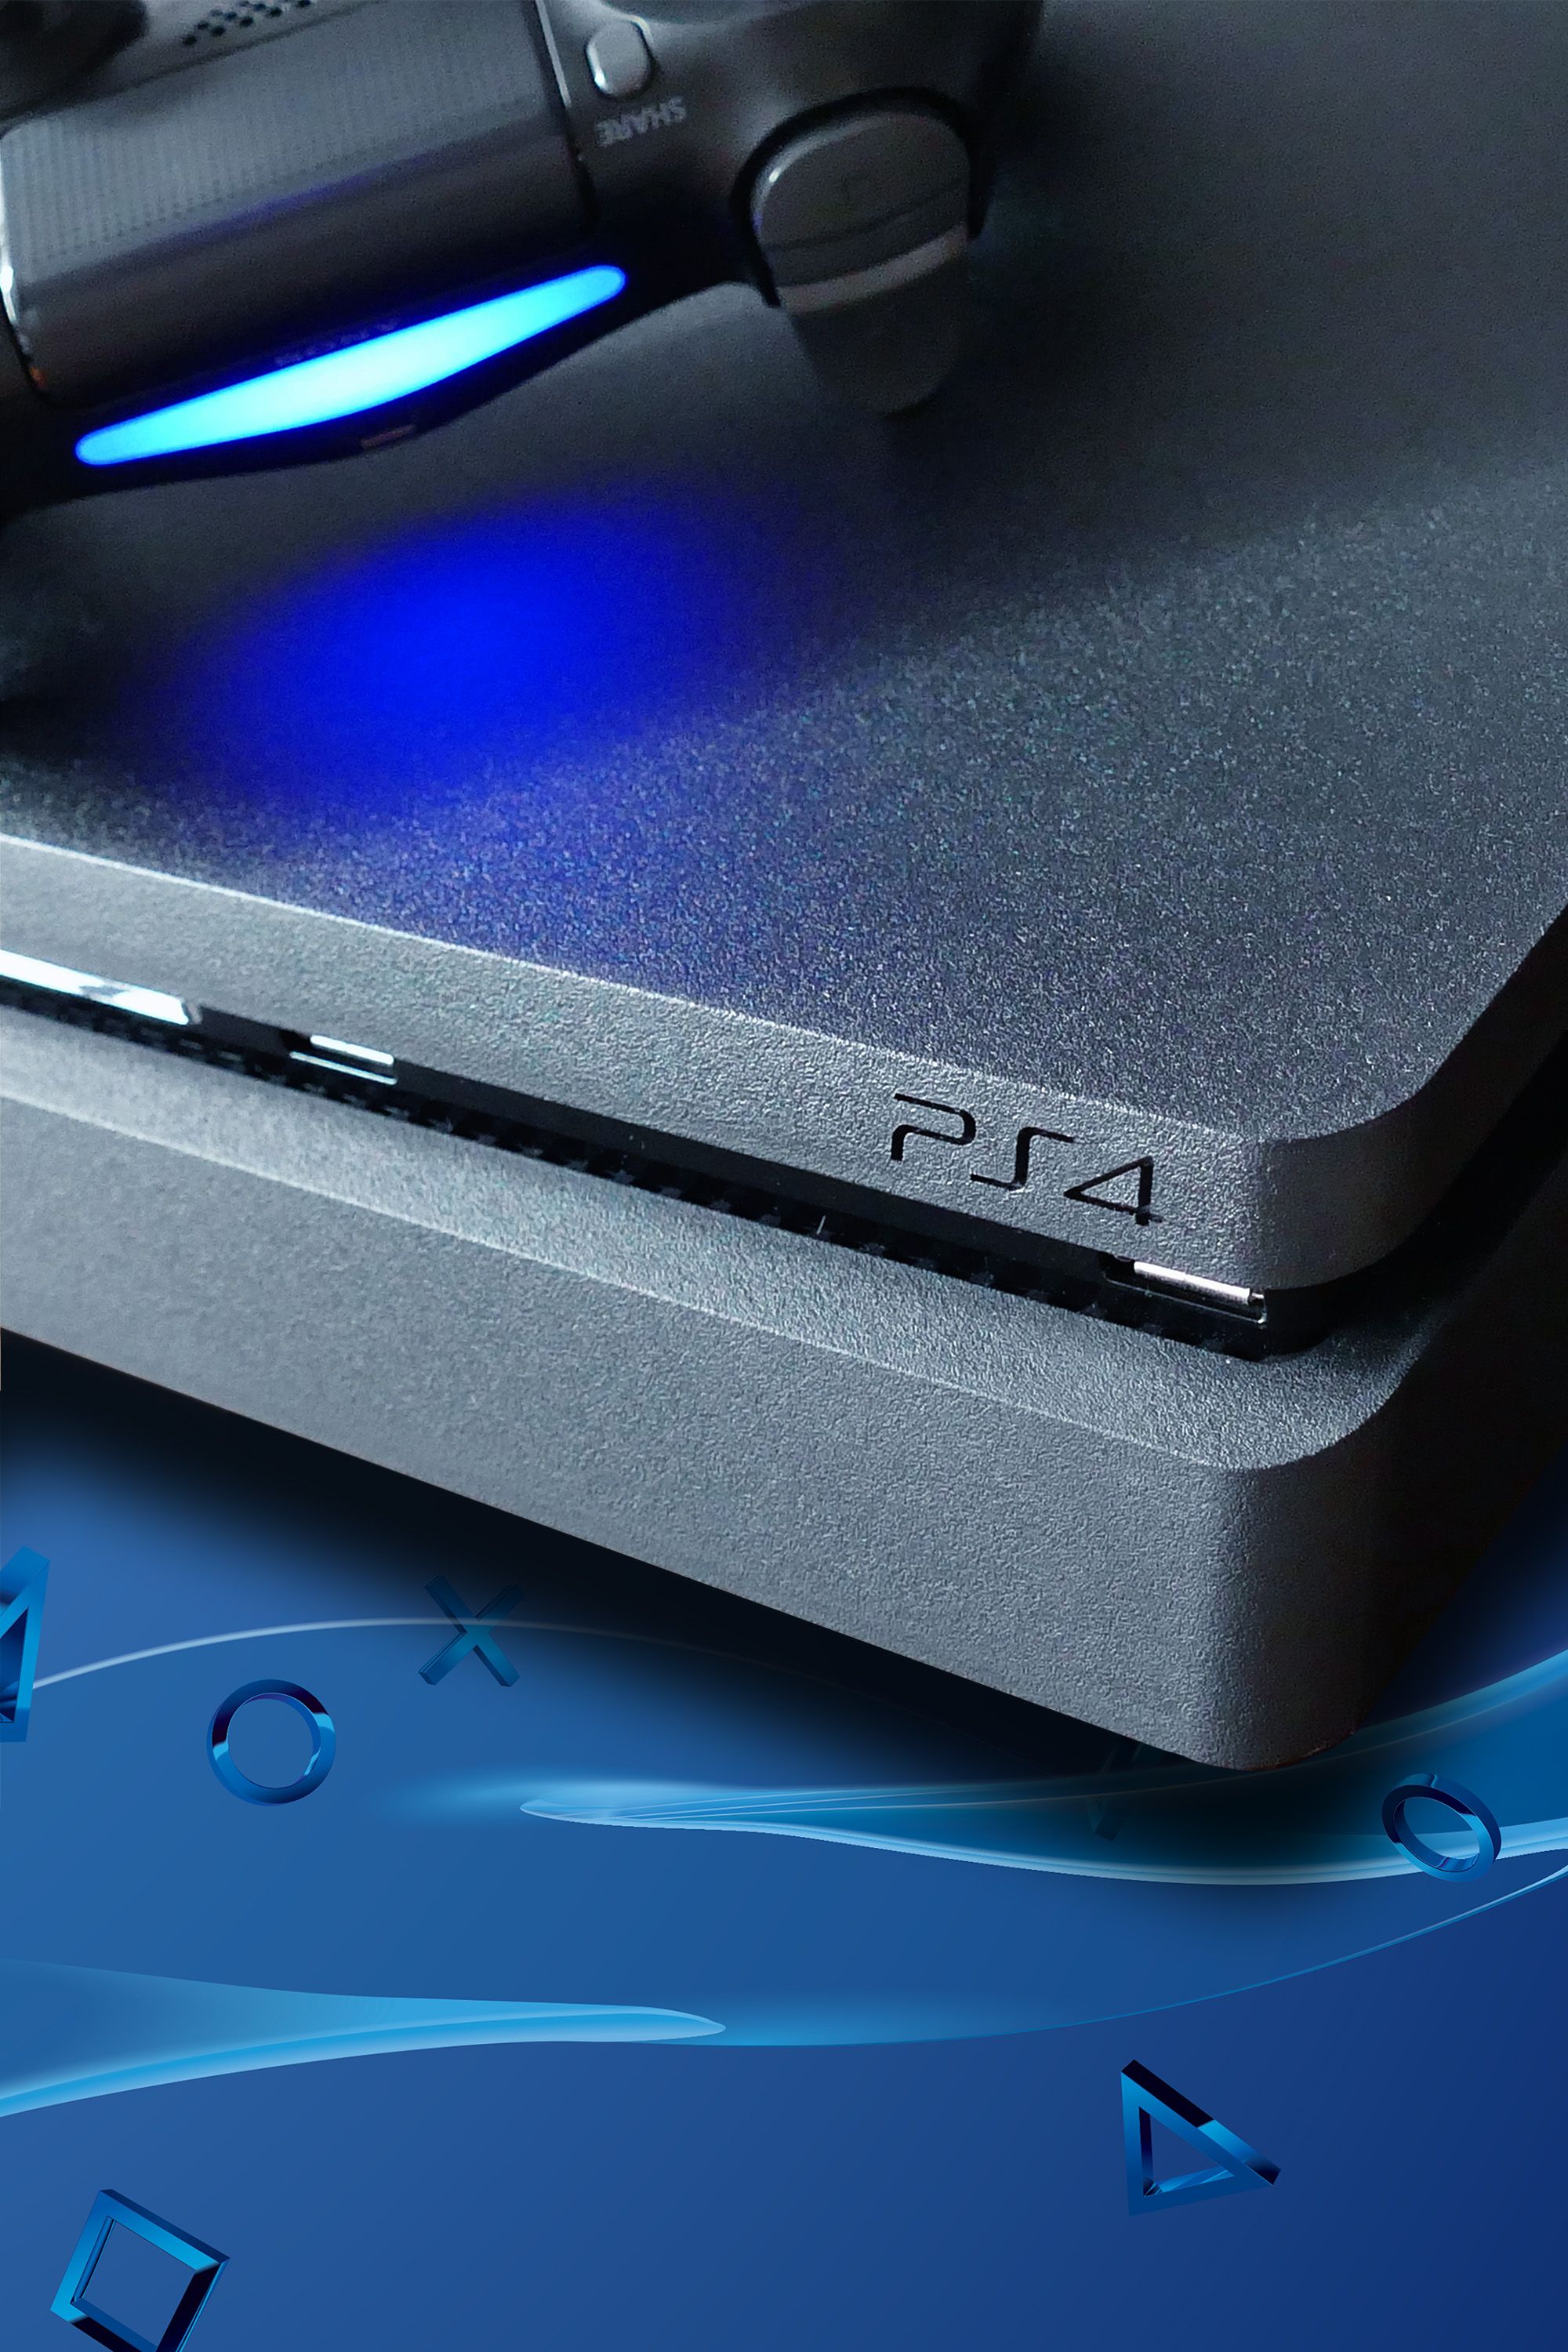 Playstation-4-Sony-console